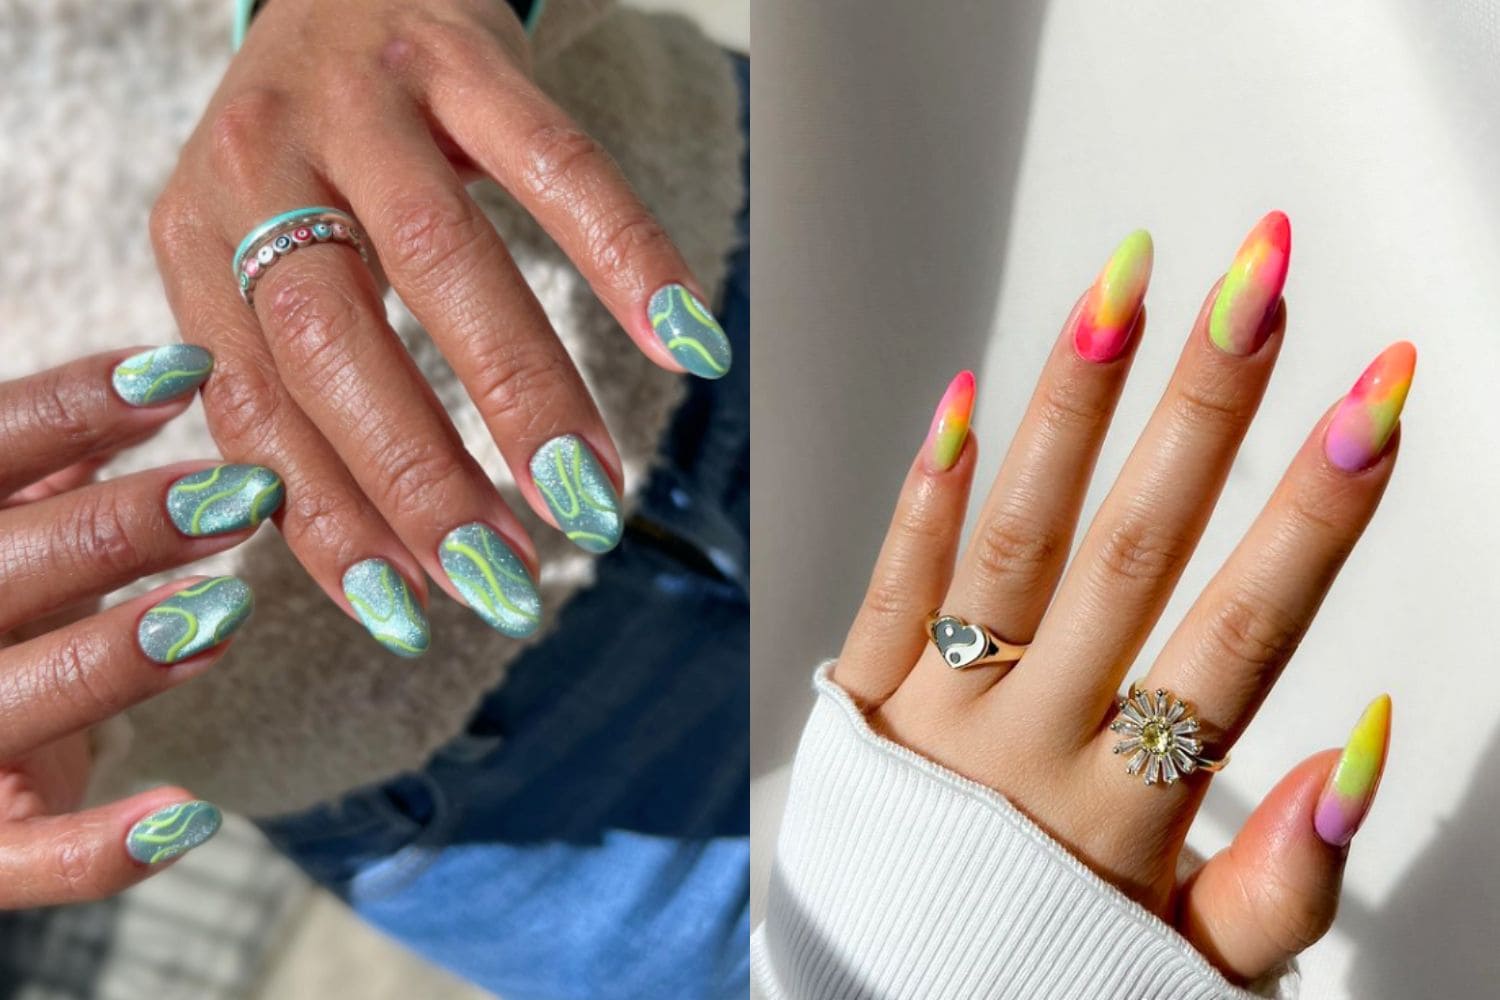 7. "Summer Nail Colors for Short Nails That Will Make a Statement" - wide 10